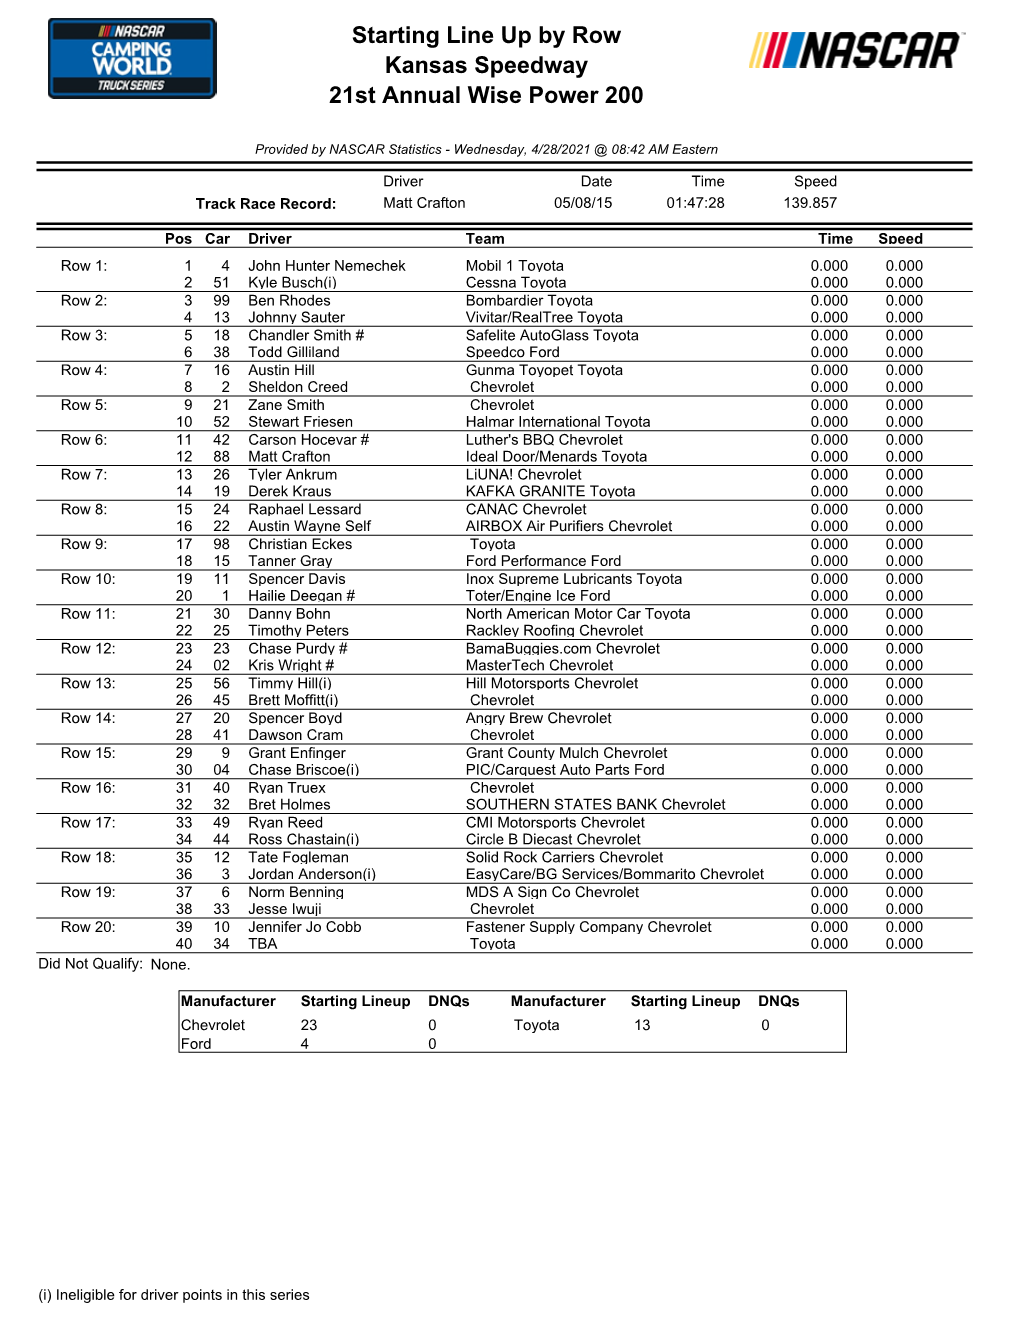 Starting Line up by Row Kansas Speedway 21St Annual Wise Power 200